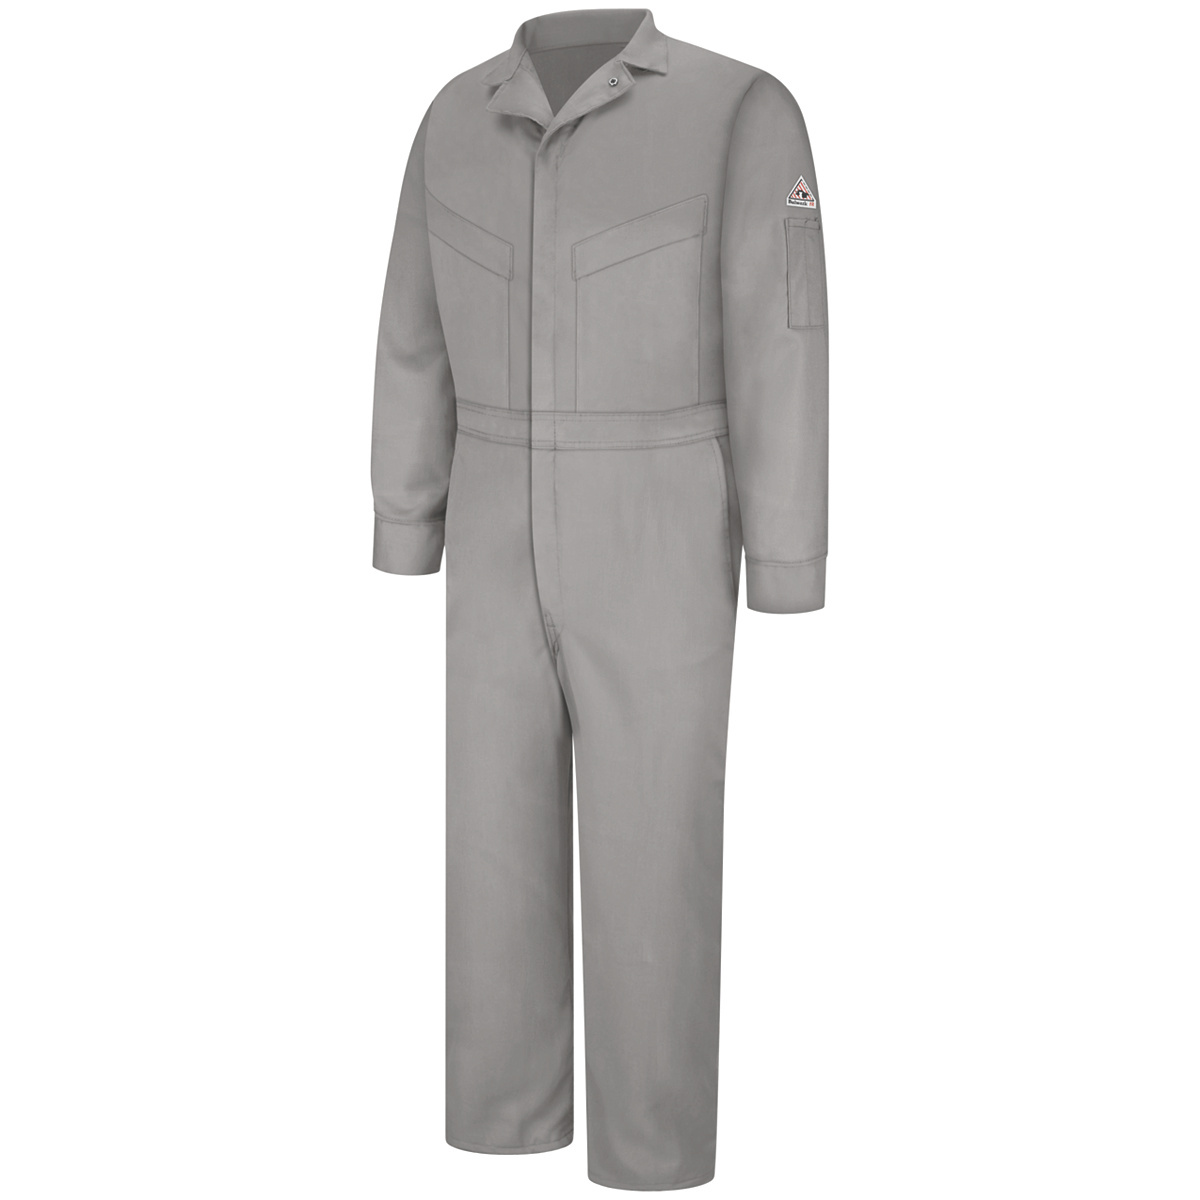 Bulwark® 36 Regular Gray Westex Ultrasoft®/Cotton/Nylon Water Repellent Flame Resistant Coveralls With Zipper Front Closure